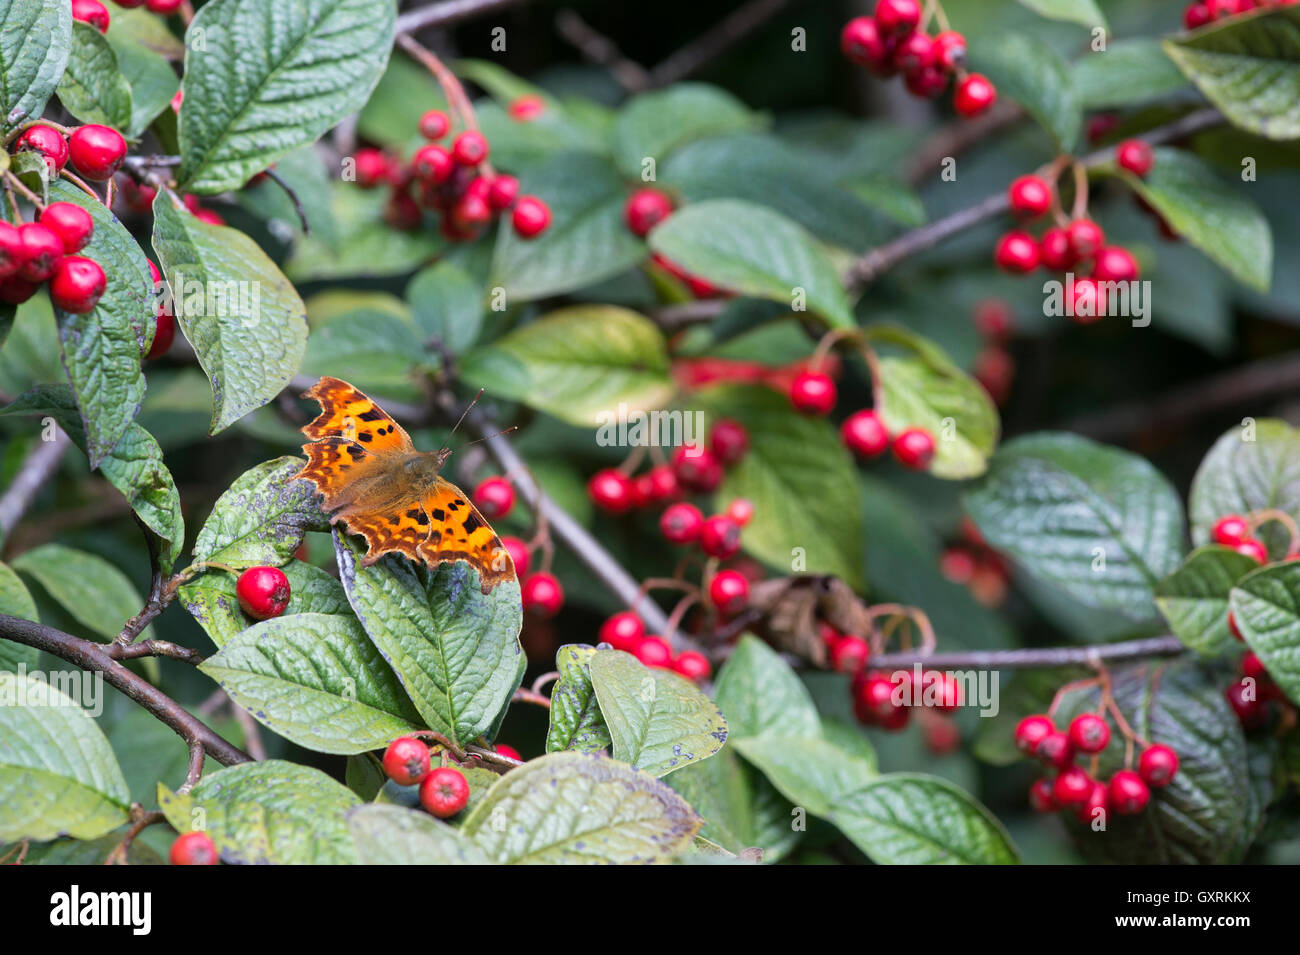 Polygonia c-album. Comma butterfly on Late cotoneaster shrub with red berries in an English garden Stock Photo